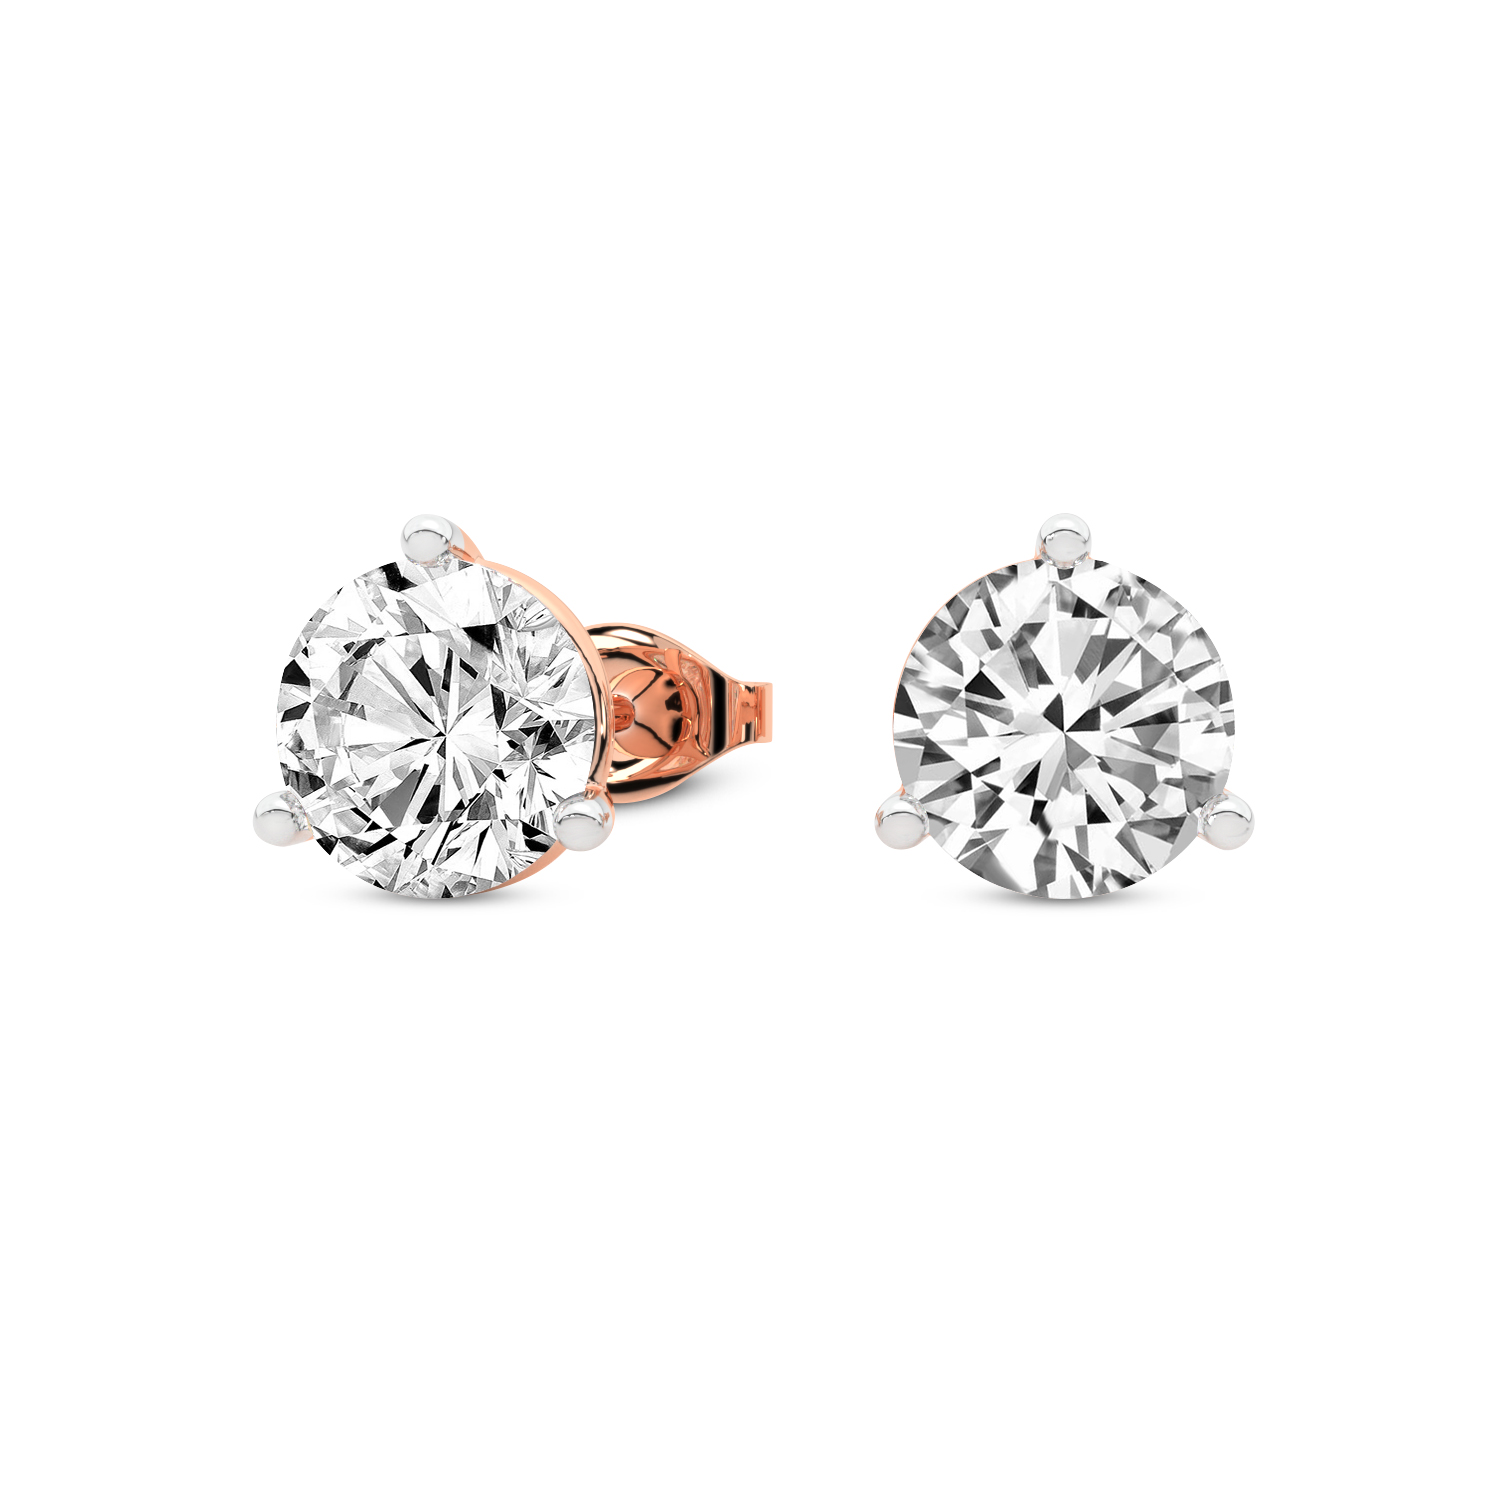 3 Prong Martini Round Lab Diamond Stud Earrings rose gold earring, small right view